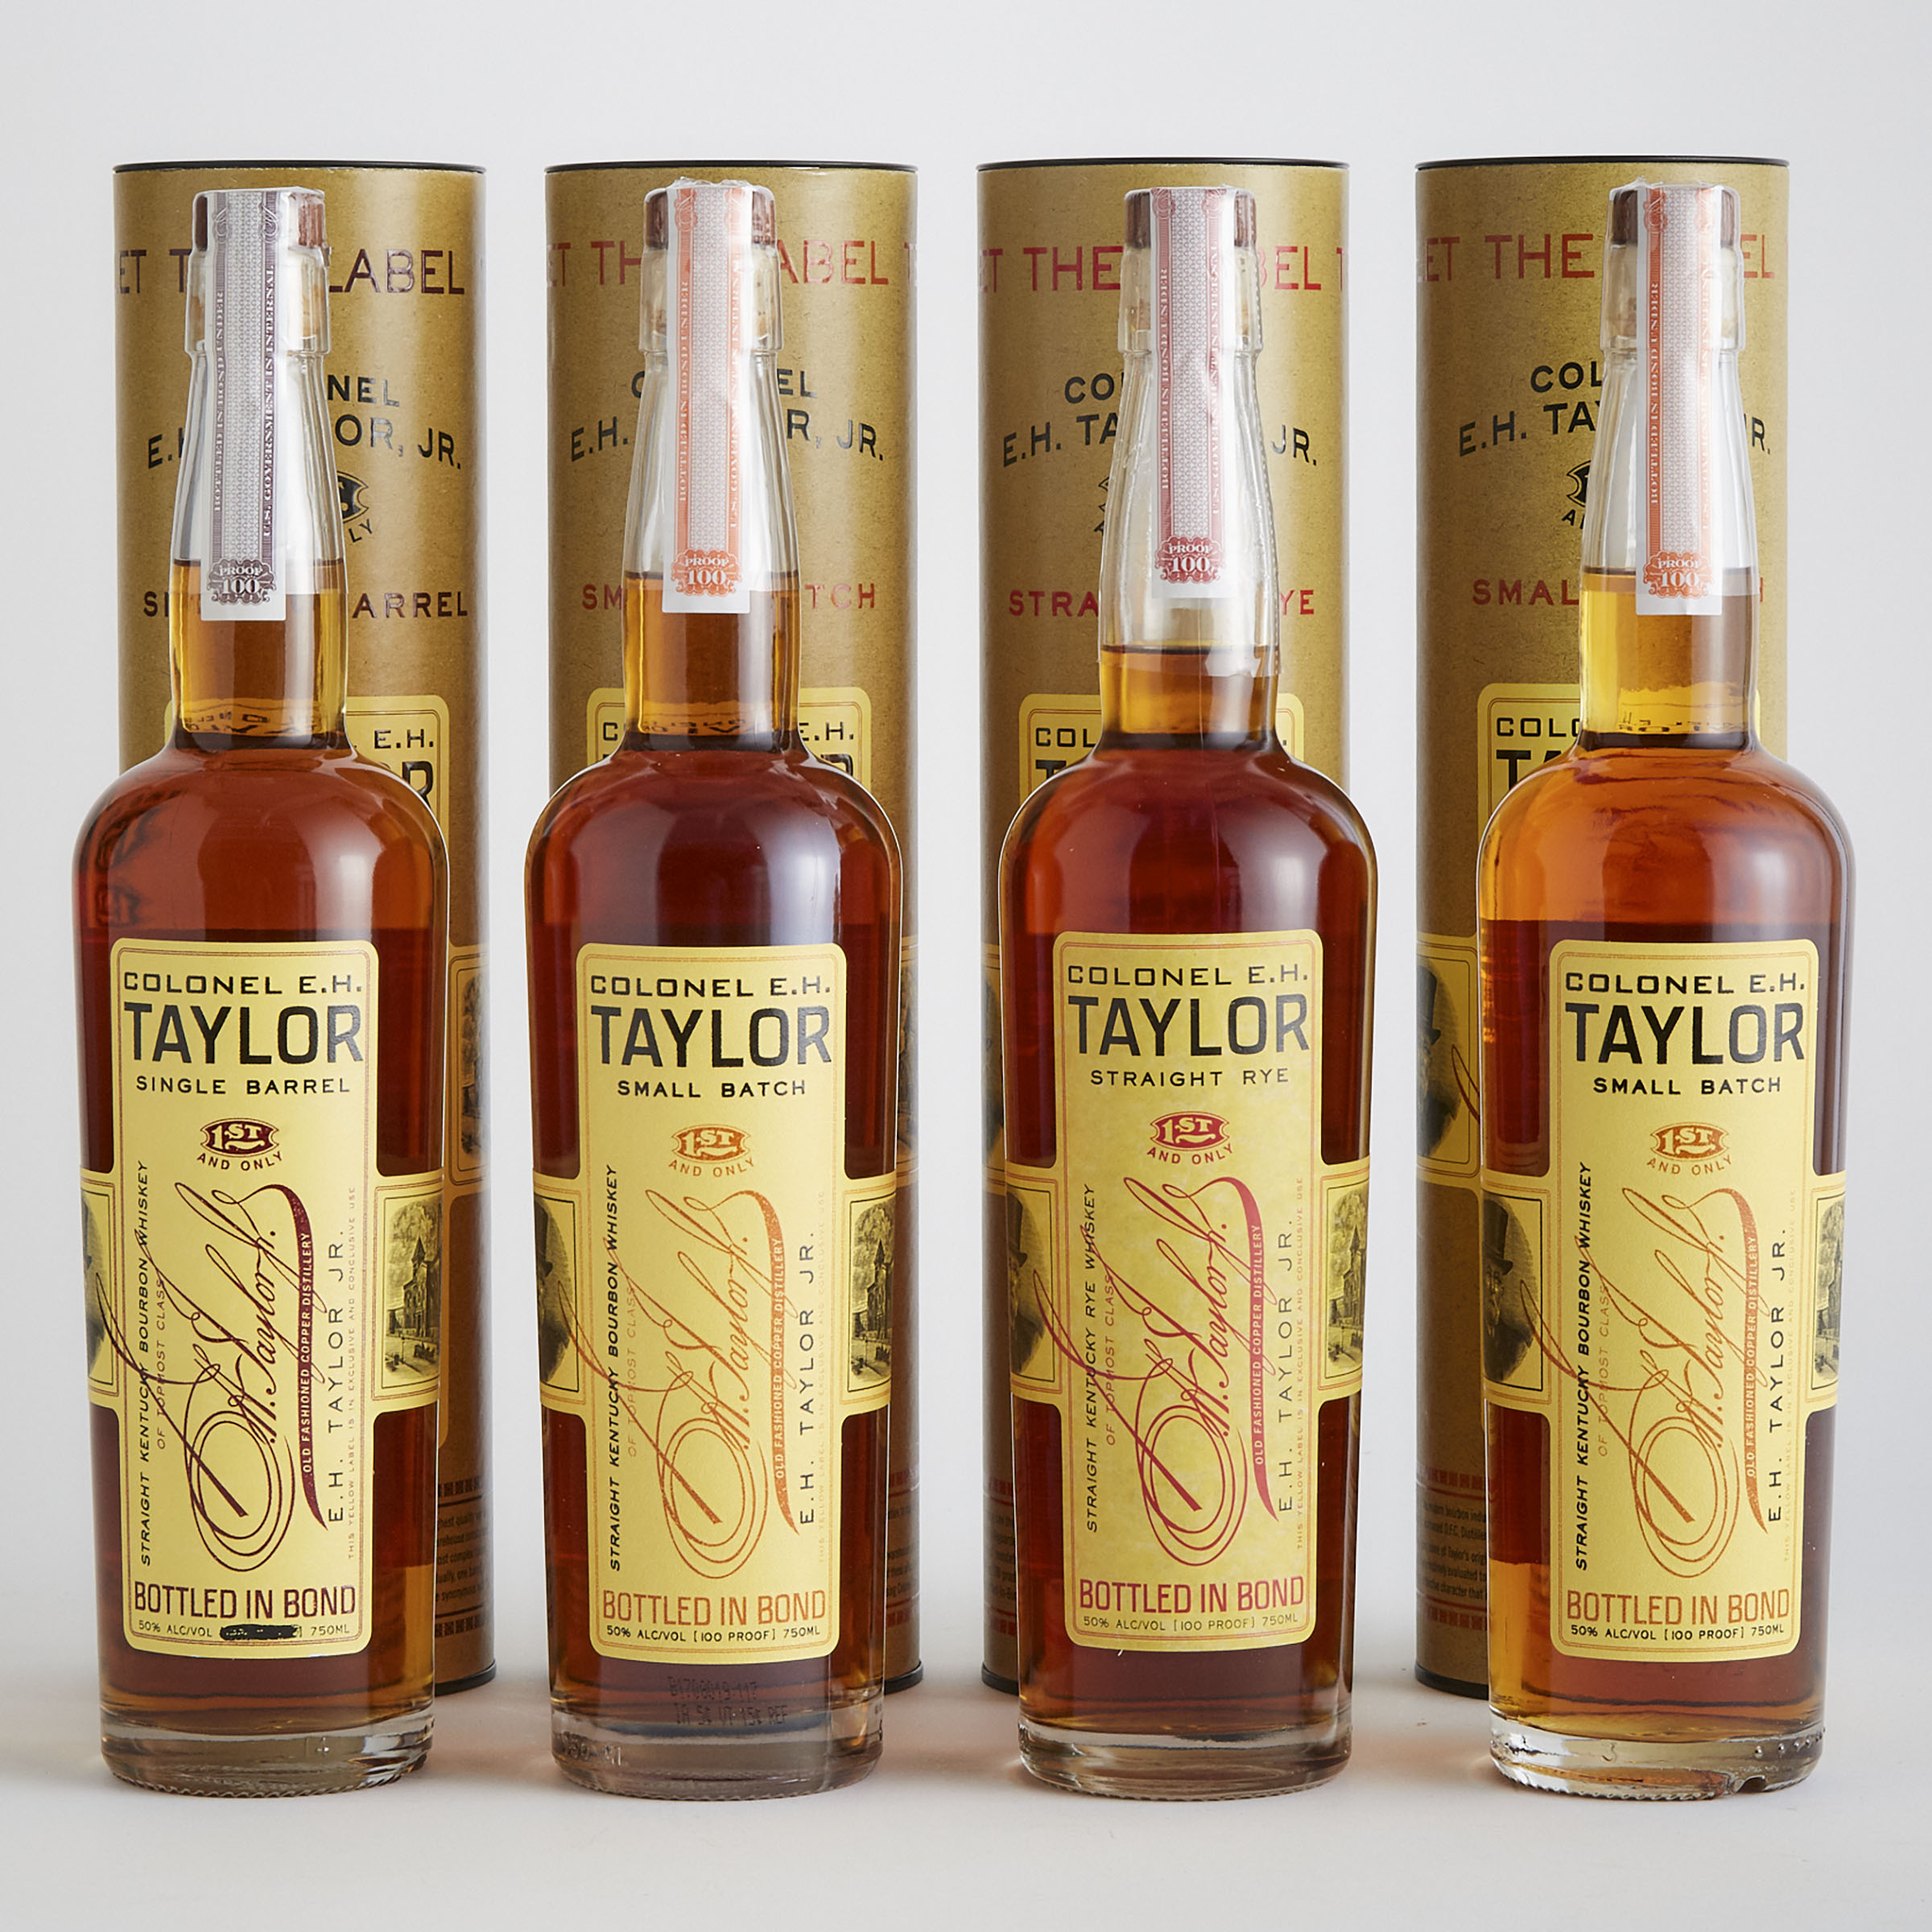 COLONEL E.H. TAYLOR JR. SINGLE BARREL STRAIGHT KENTUCKY BOURBON WHISKEY (ONE 750 ML)
COLONEL E.H. TAYLOR JR. SMALL BATCH STRAIGHT KENTUCKY BOURBON WHISKEY (TWO 750 ML)
COLONEL E.H. TAYLOR JR. STRAIGHT KENTUCKY RYE WHISKEY (ONE 750 ML)